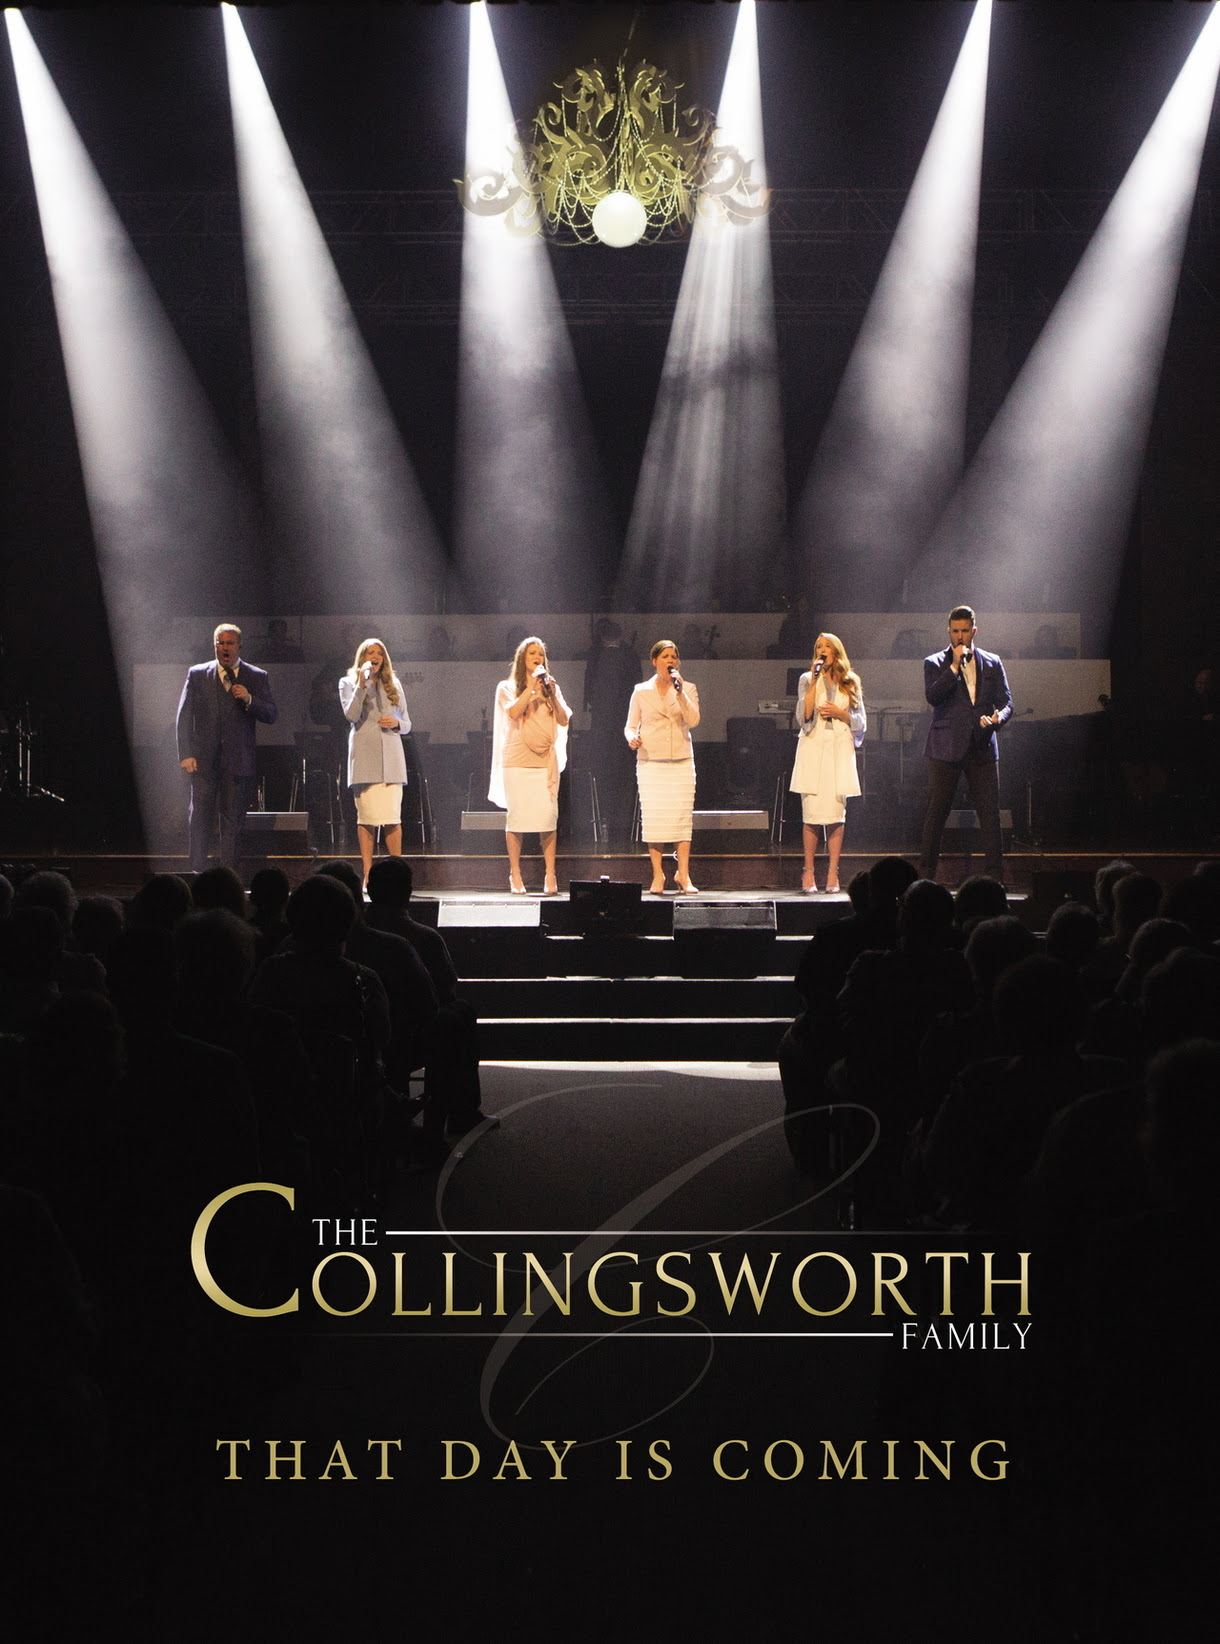 The Collingsworth Family Releases Landmark DVD Project